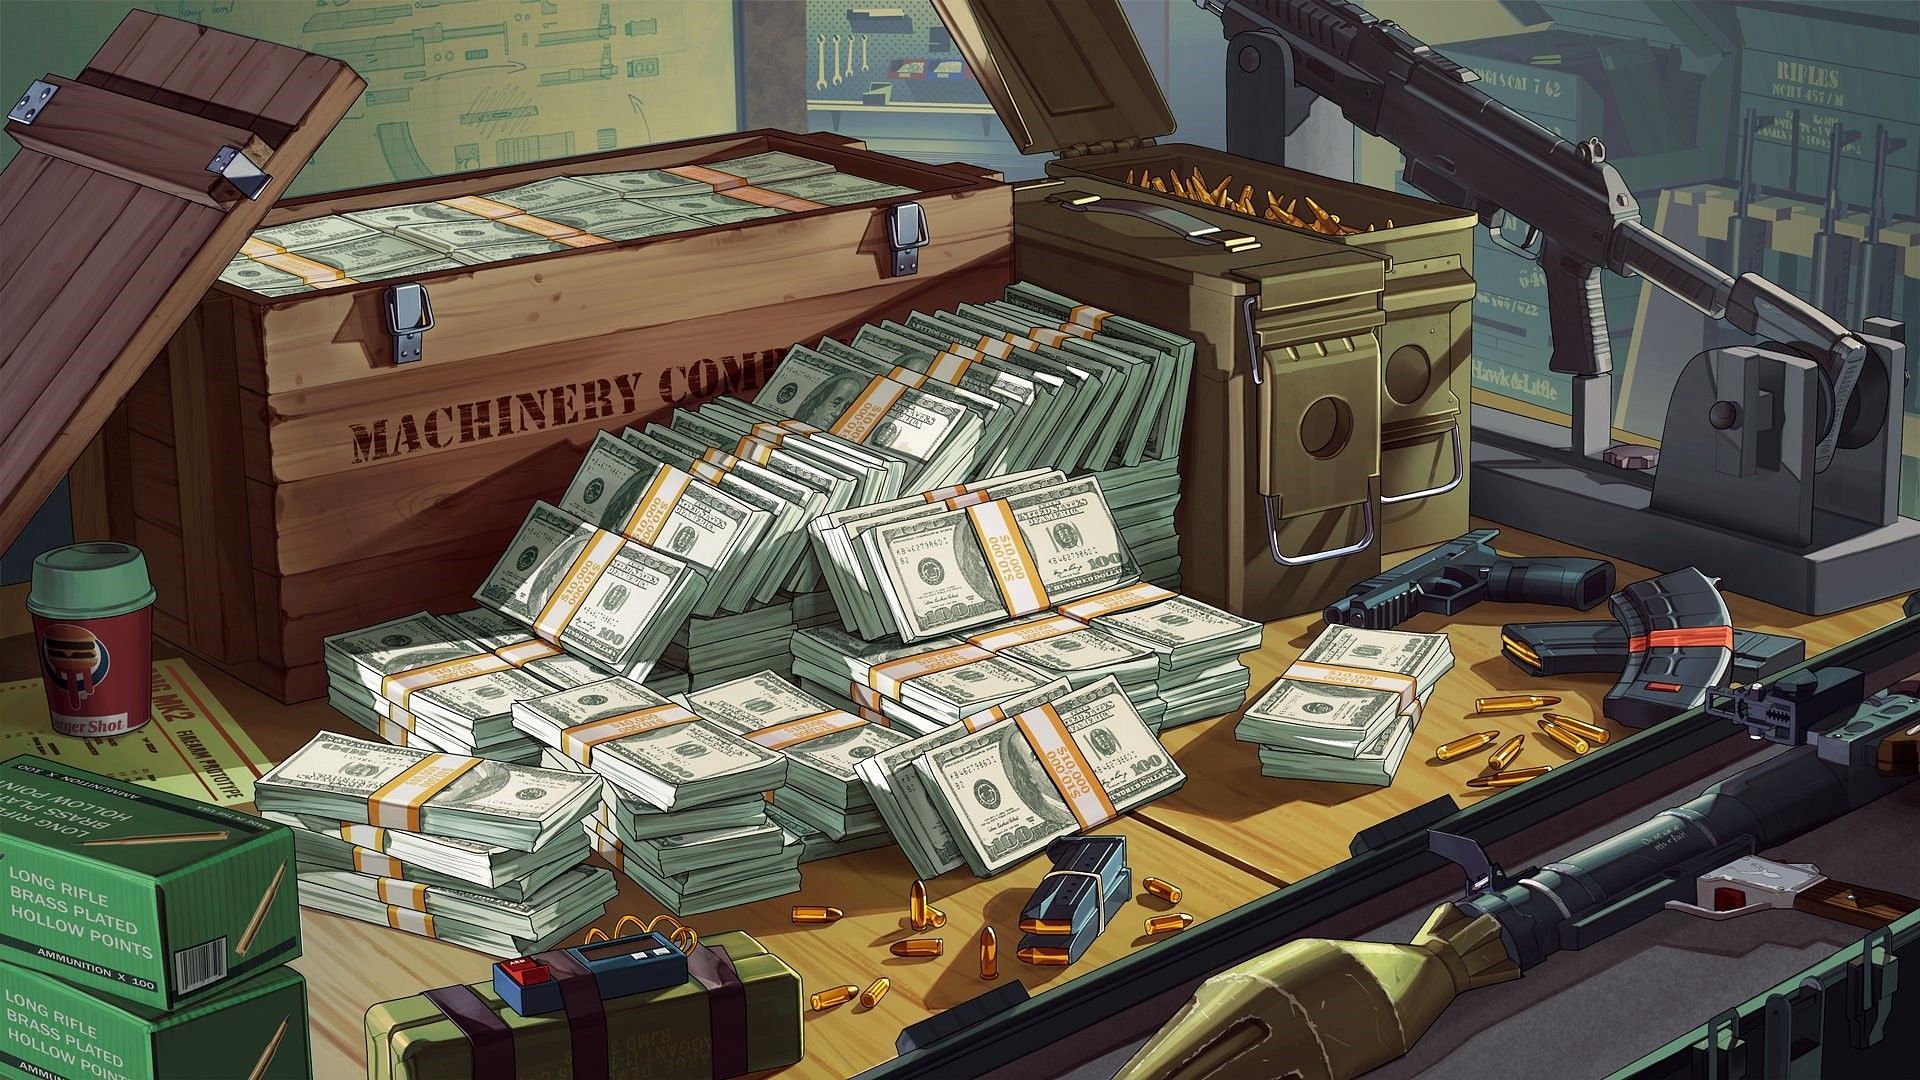 GTA Online players can grind jobs to earn cash to level up easily. (Image via Sportskeeda)